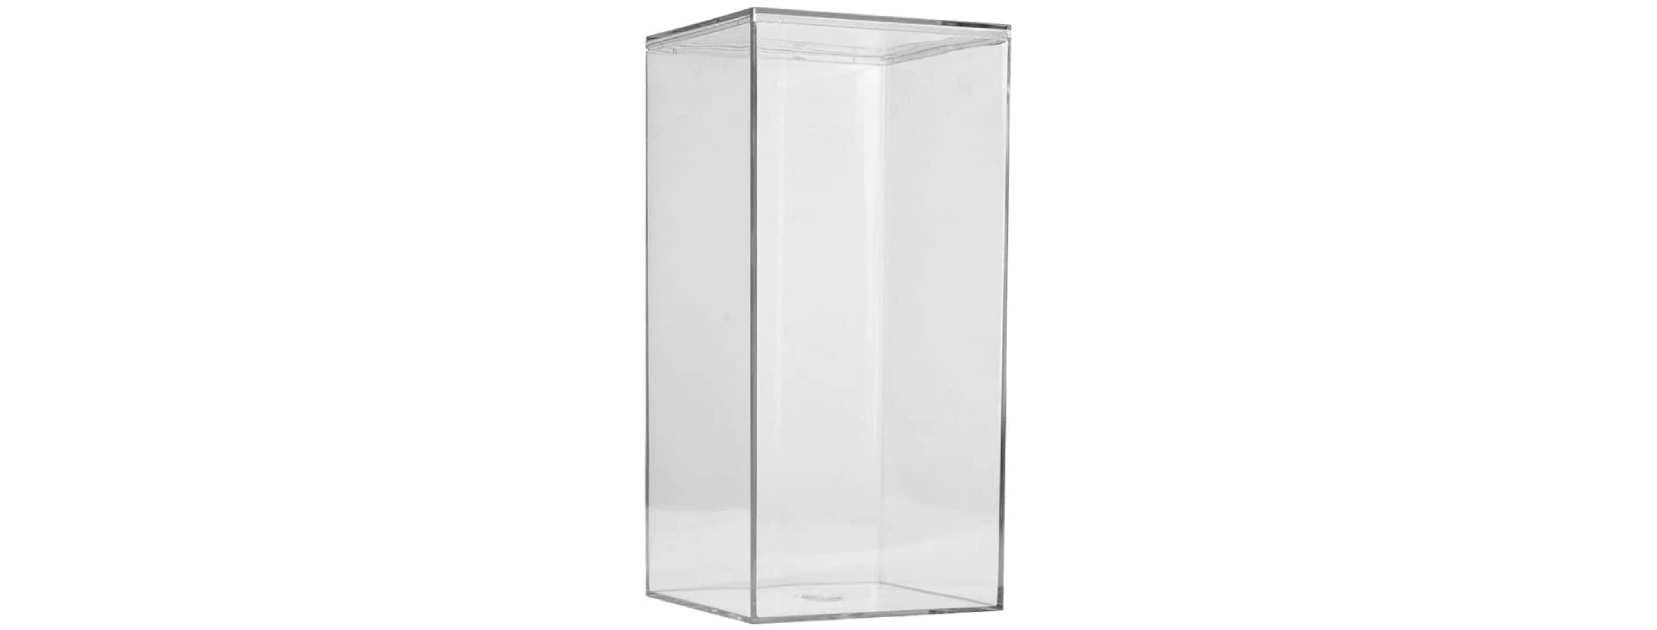 Clear Acrylic Boxes 3.75X3.75X2.5 8 Pack – Hammont